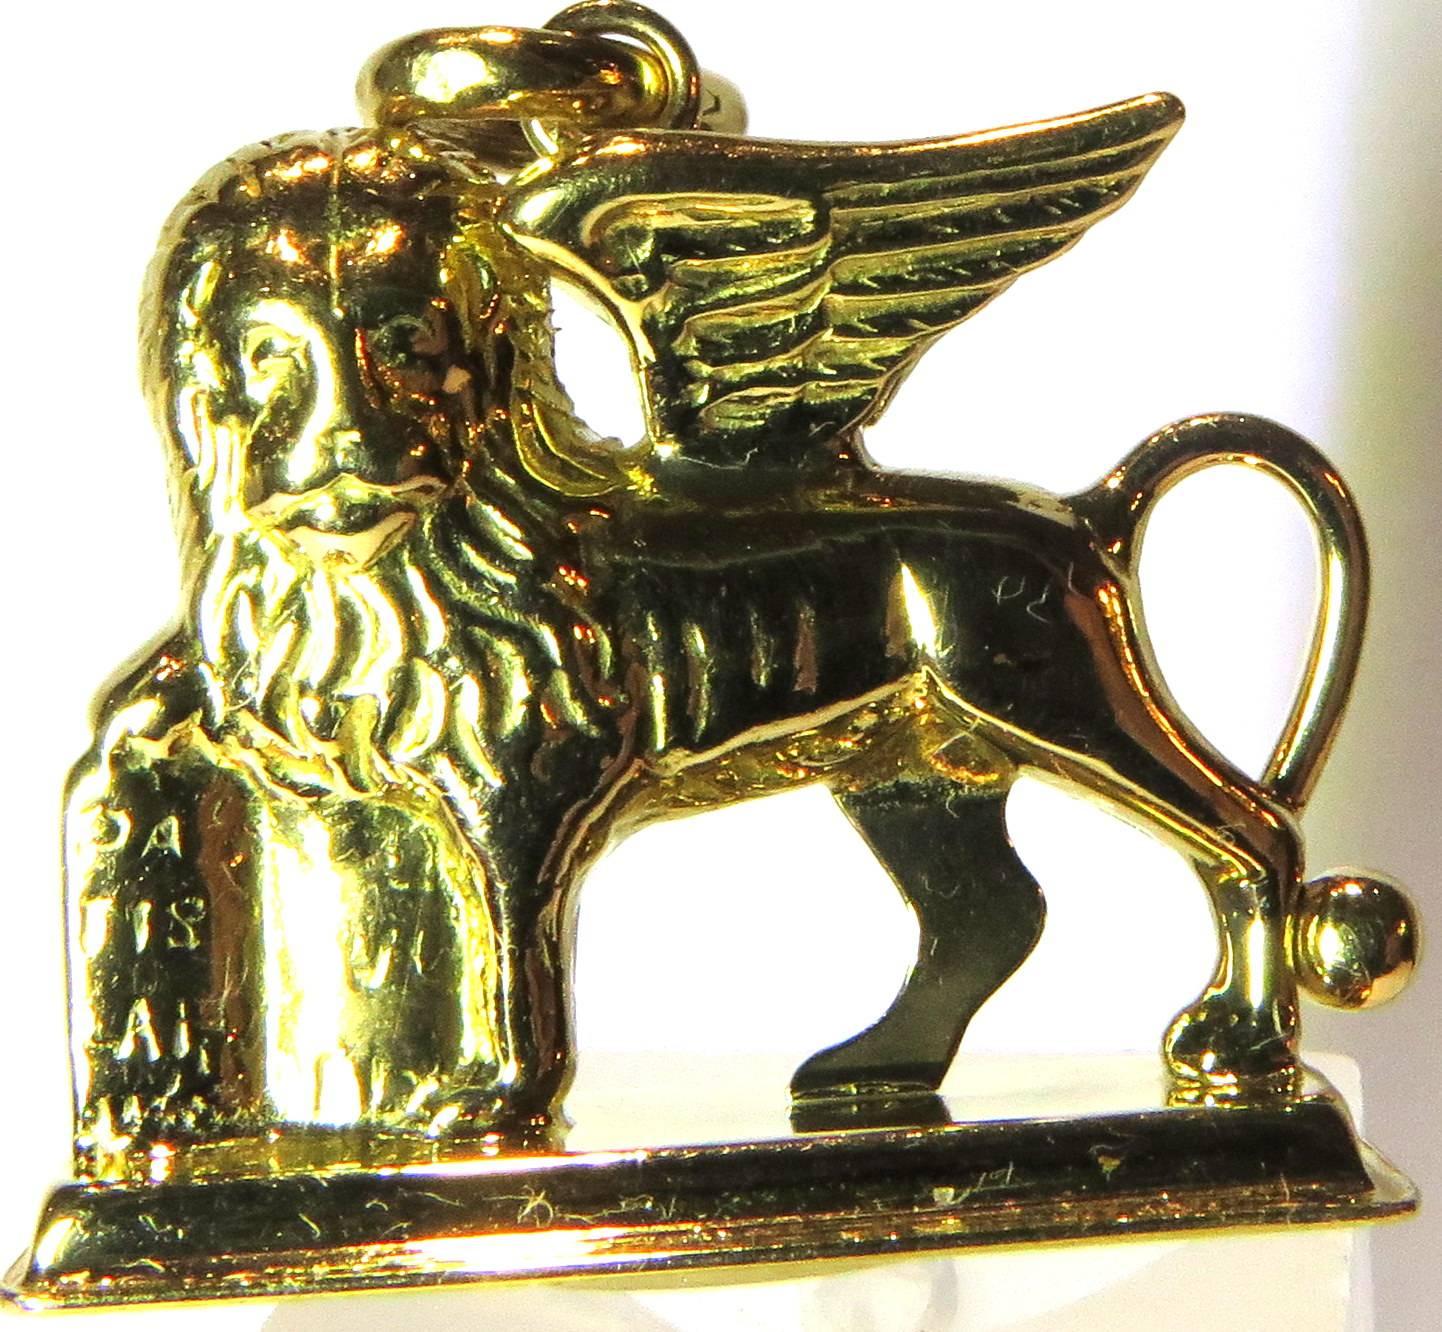 This is the perfect 18k travel charm for Venice. The Lion of Saint Mark represents the Evangelist St. Mark. In the form of a winged lion holding a Bible and is the symbol of the city of Venice. This wonderful charm pendant has great detail and nice